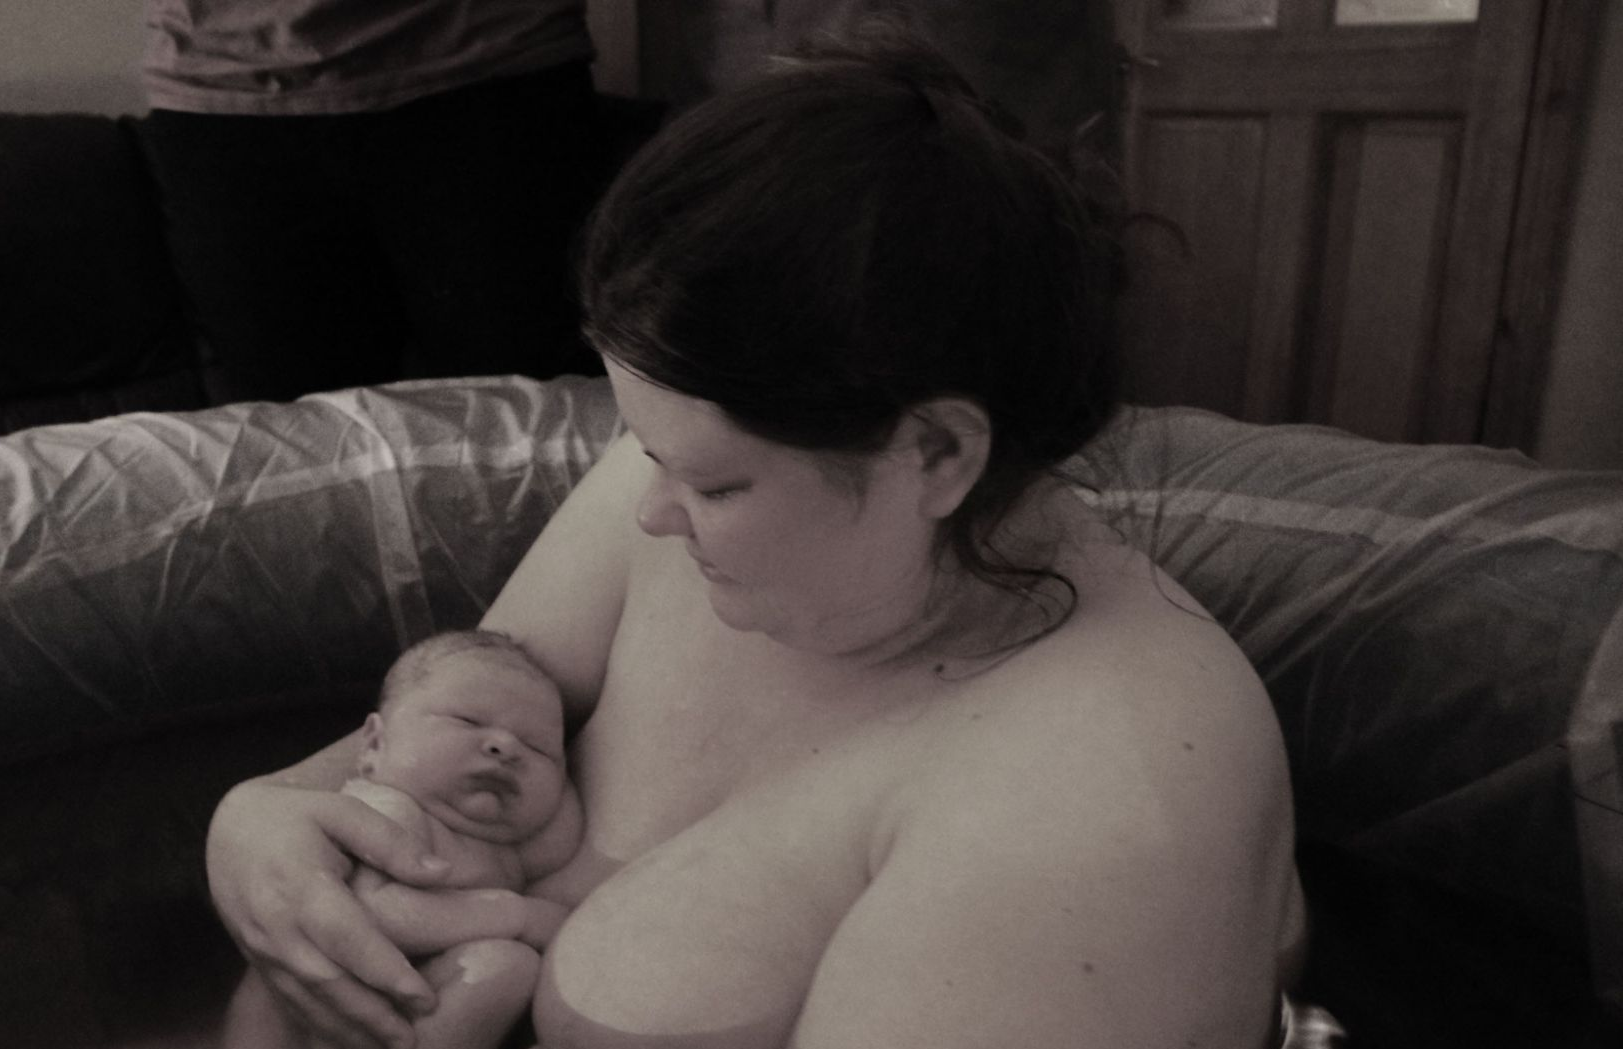 Black and white image of a woman cuddling her newborn baby in a birth pool.